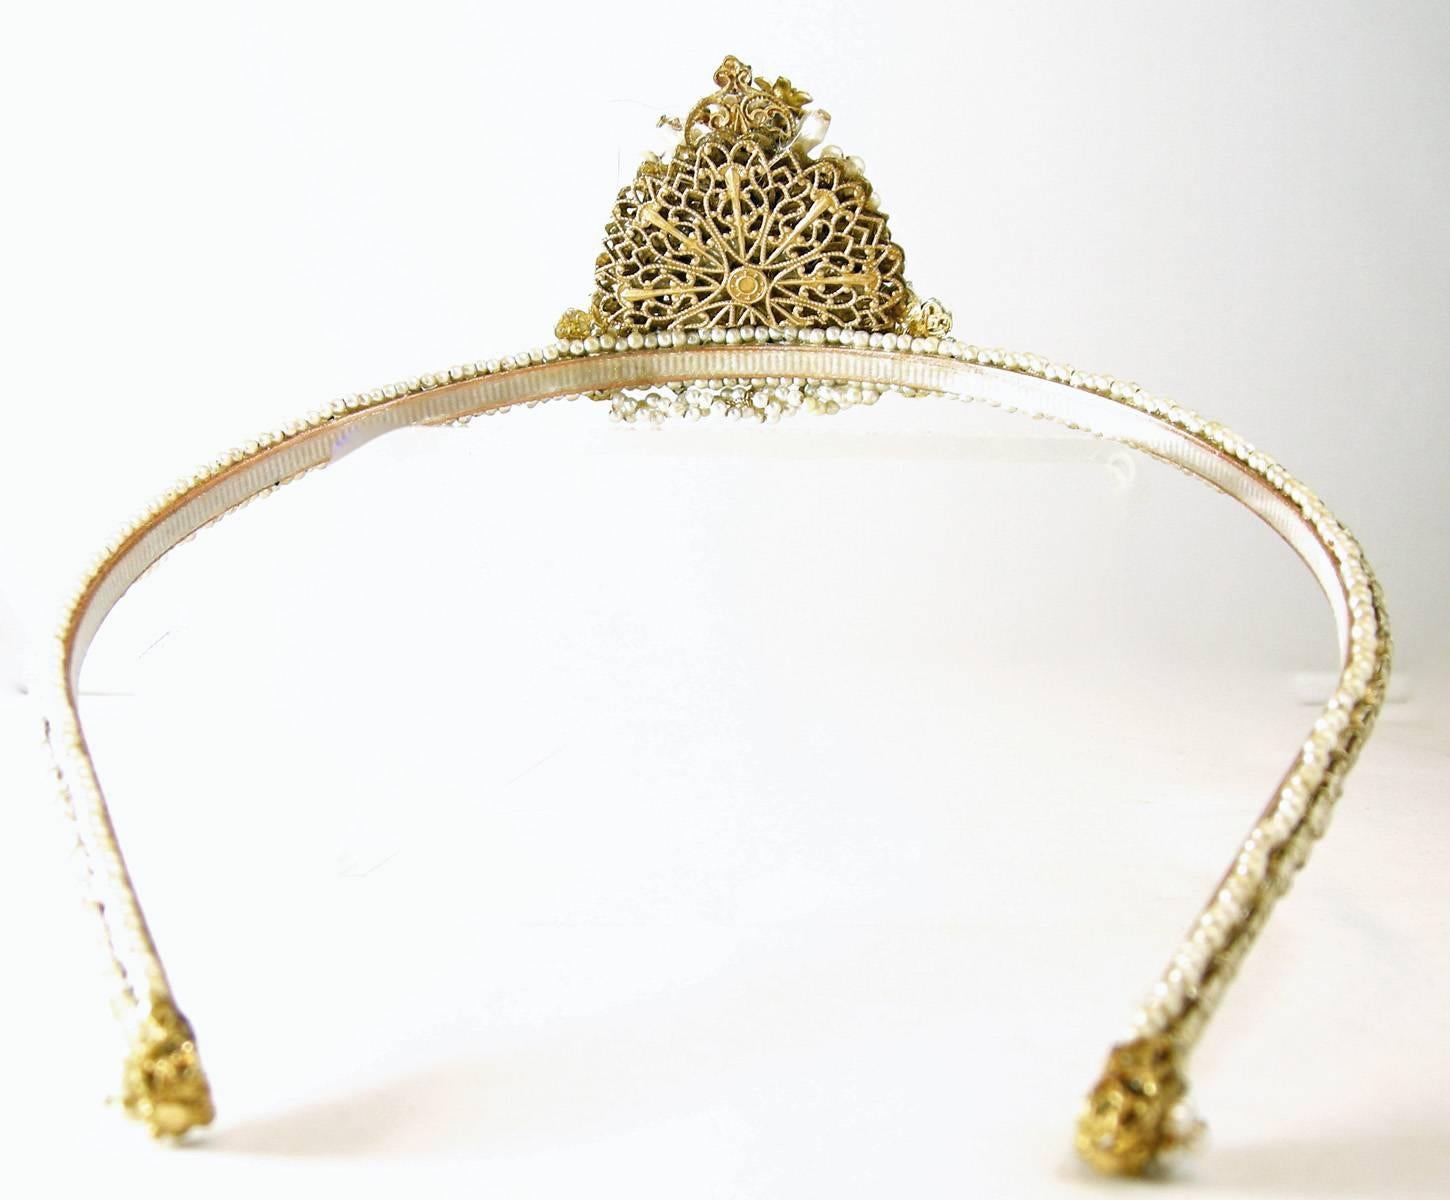 I have been very lucky to be able to get these vintage Haskell tiaras from a top collector.  Of course, I have to beg her for each one she sells me … but it’s worth it.  This one is 15” from one end to the other and sits comfortably on the head. 